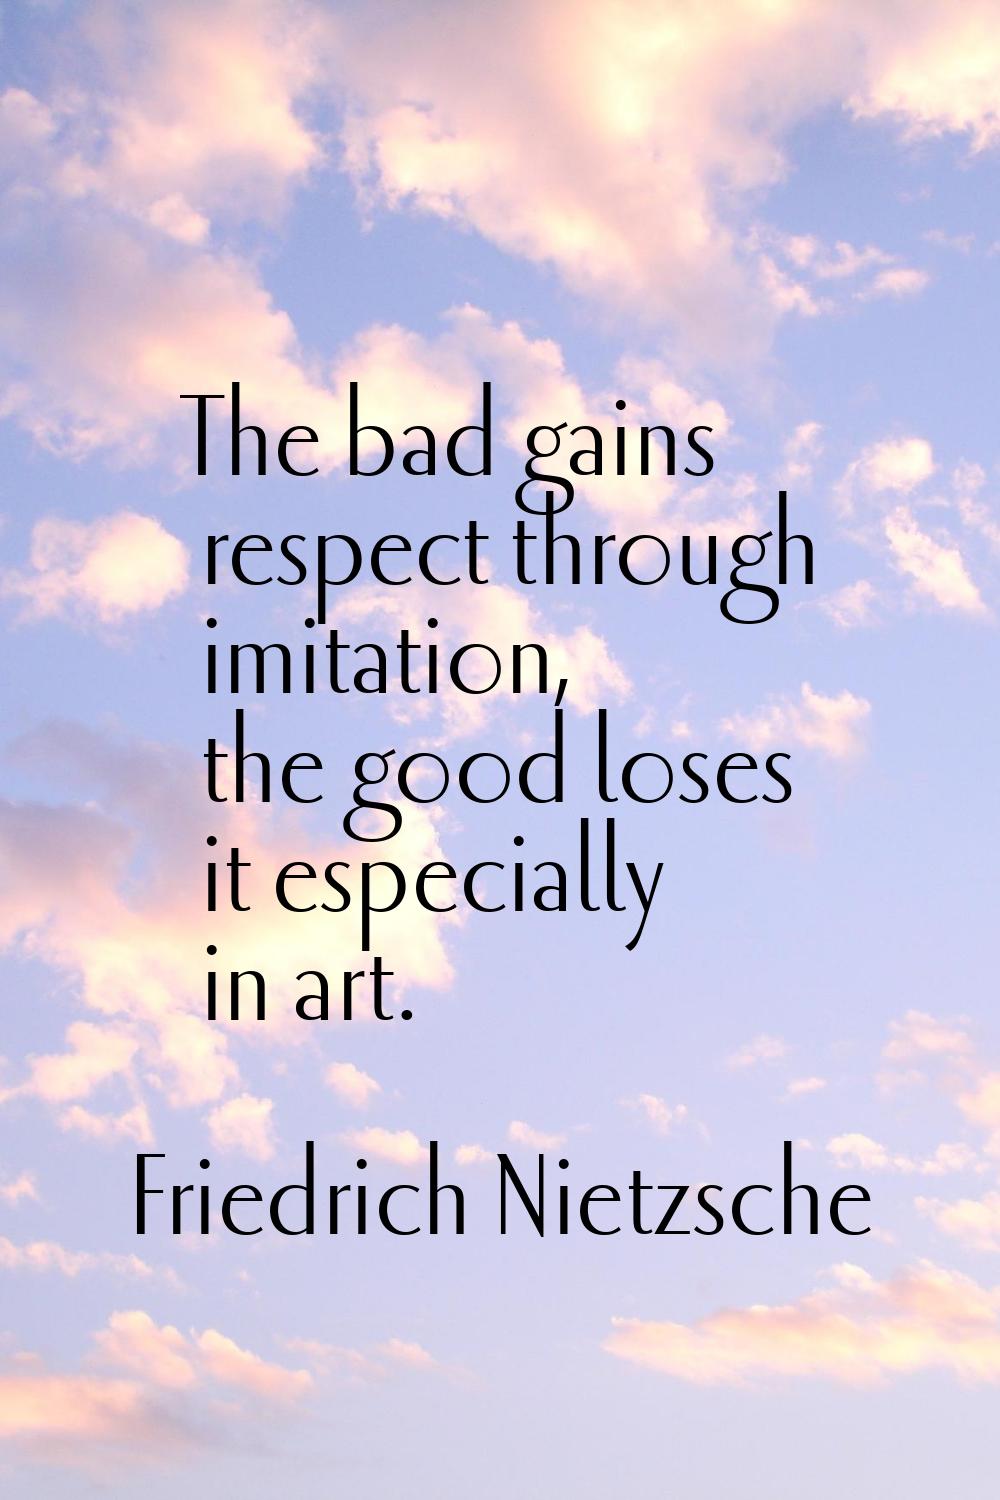 The bad gains respect through imitation, the good loses it especially in art.